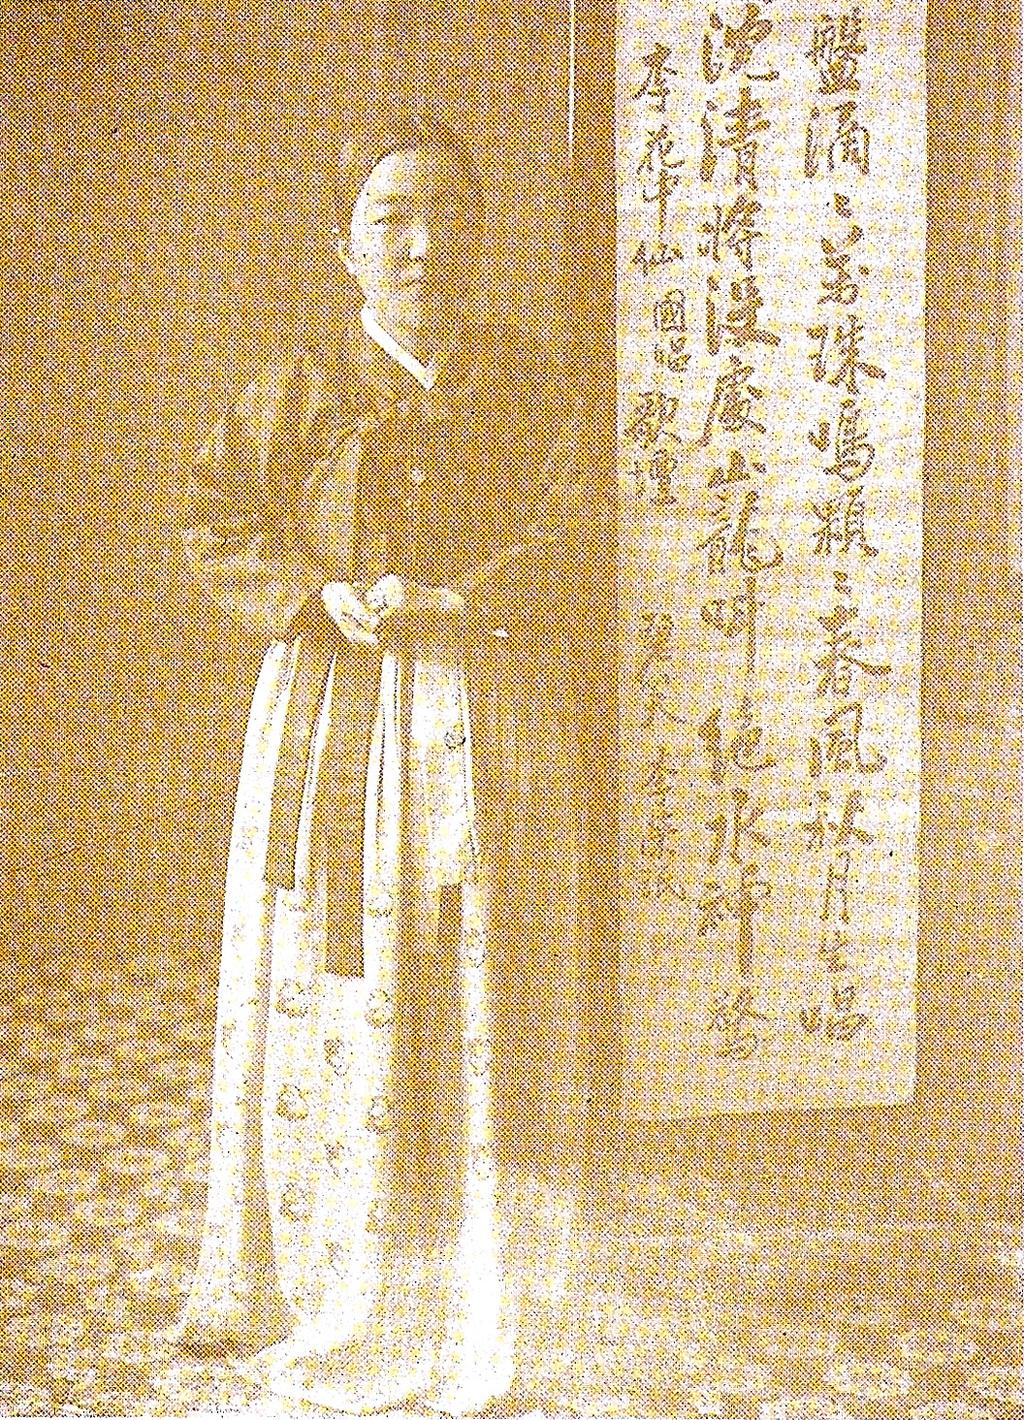 Master singers of 1940s : from left, Yi Hwajungseon and Park Rokju High remunerations were made for pansori singers including Yi Hwajungseon (1898-1943), Park Rokju (1906- when they performed for